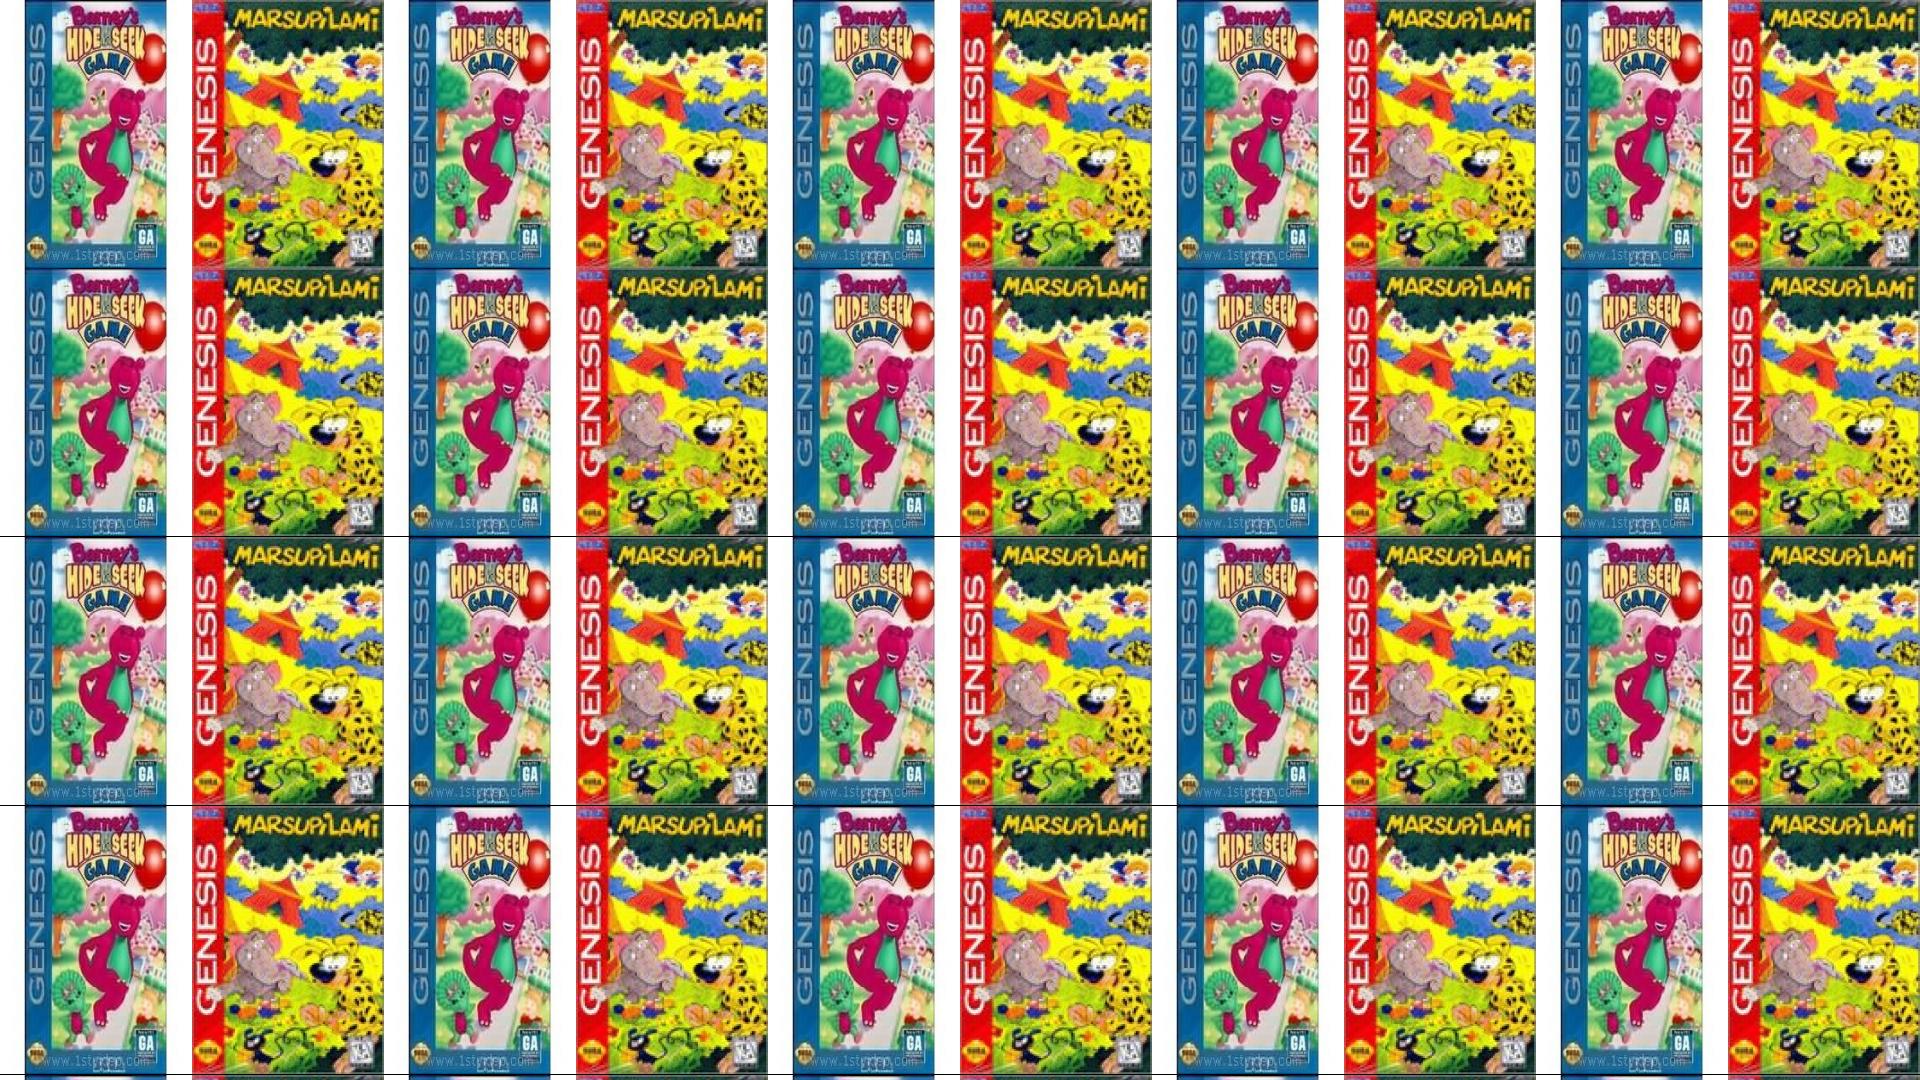 This Wallpaper With Image Of Barney Hide And Seek